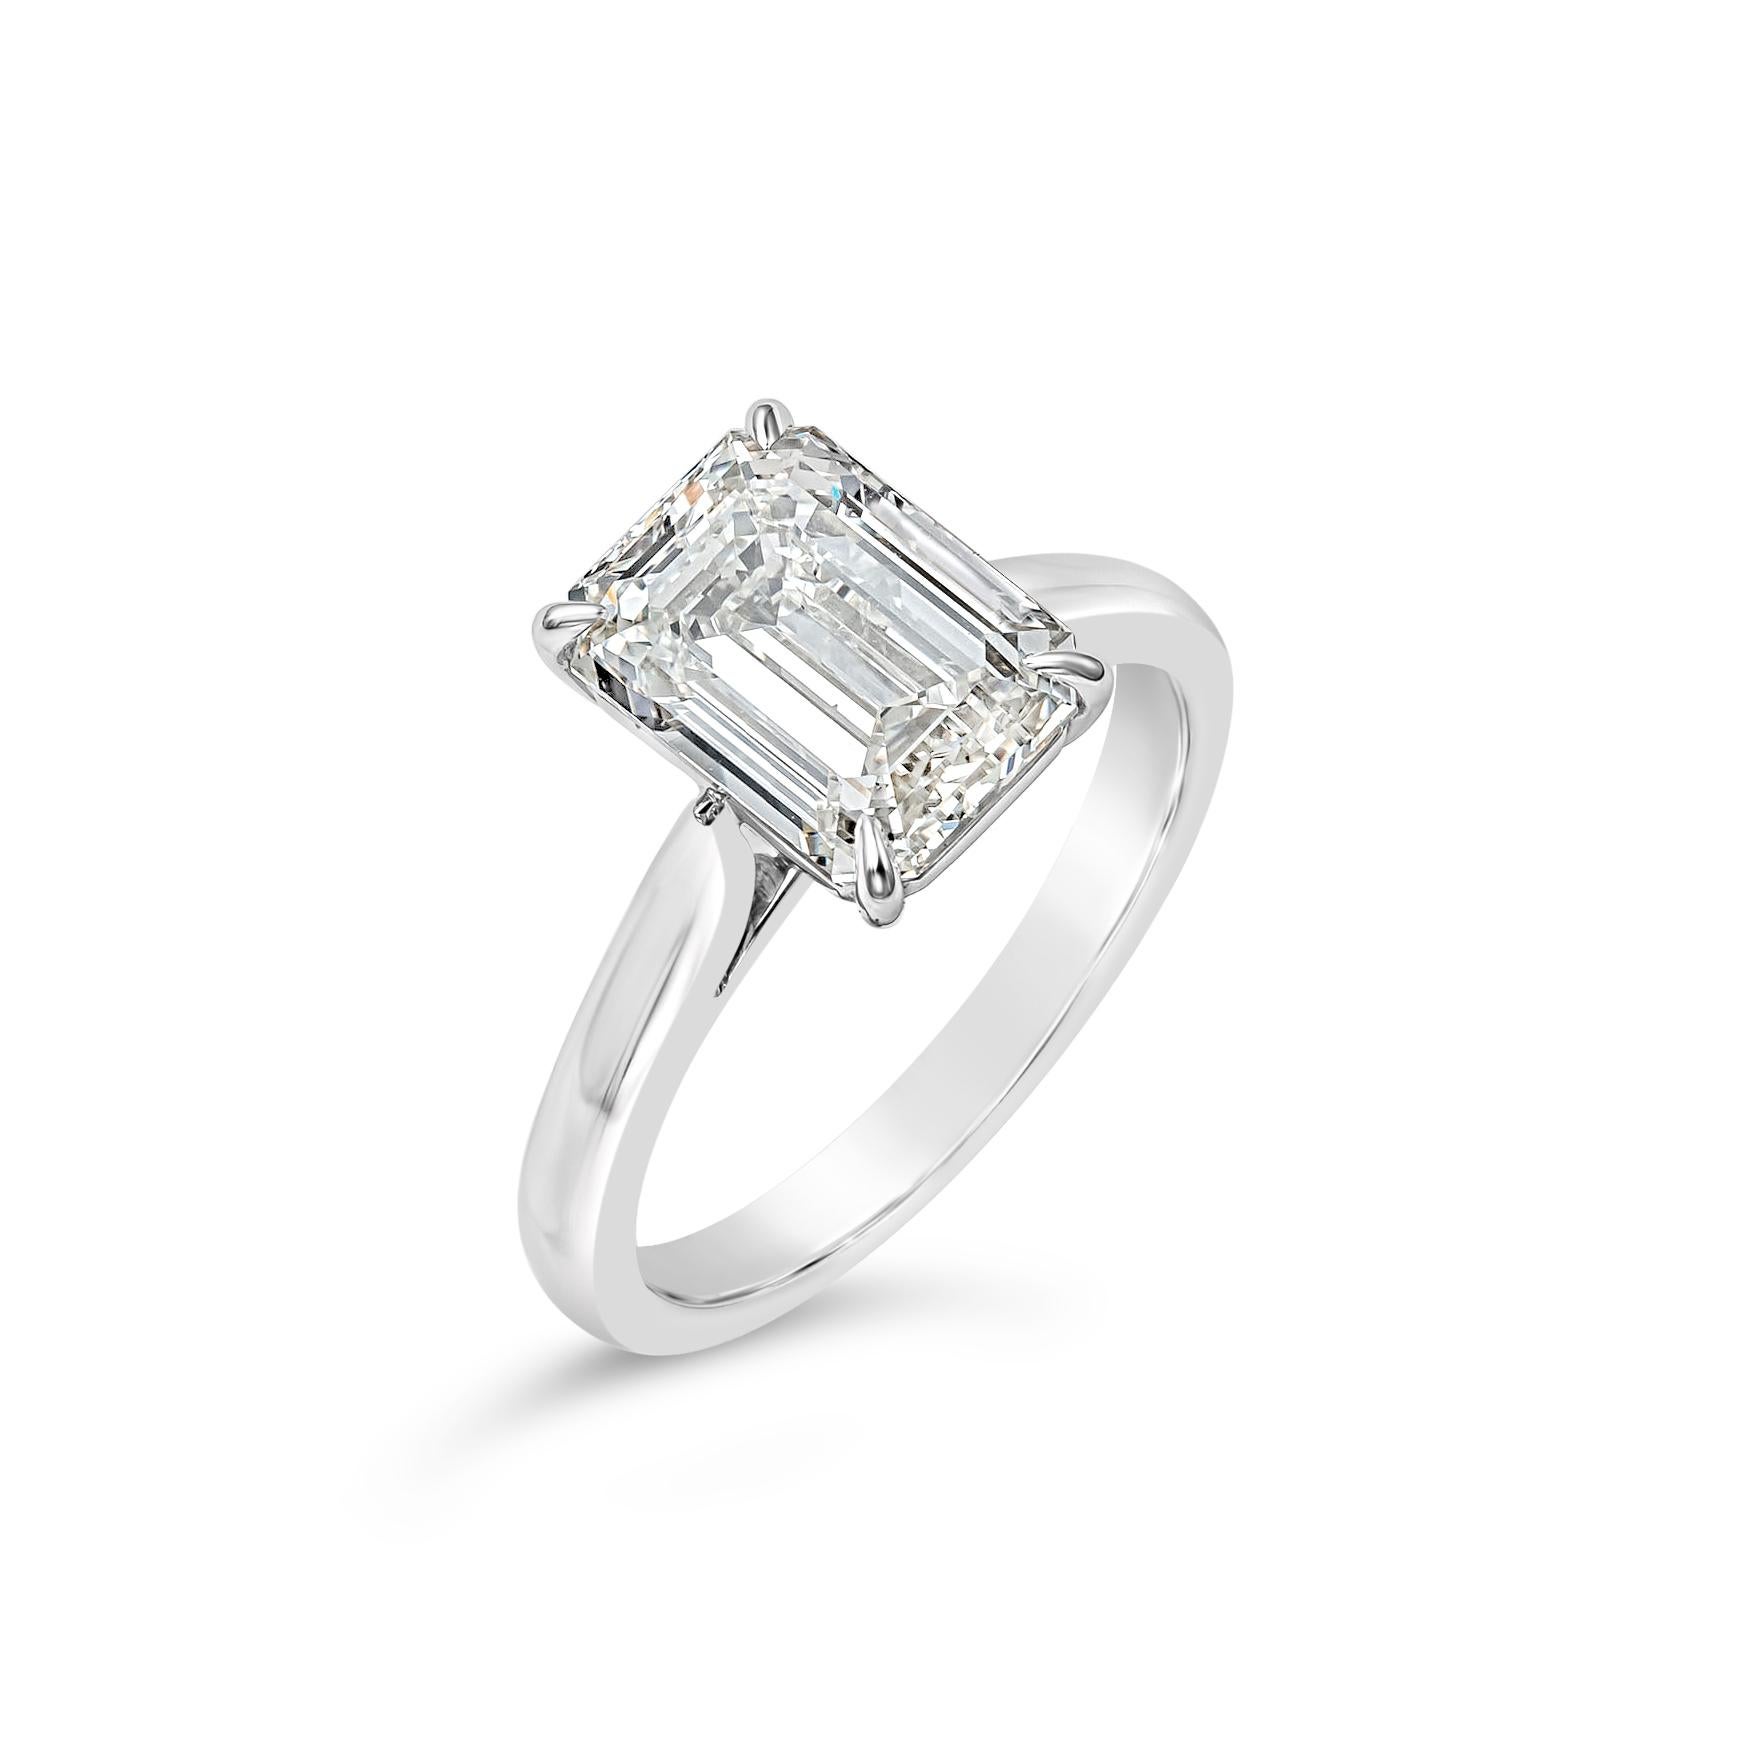 Features an elegant 3.53 carats emerald cut diamond certified by GIA as I color and SI1 in clarity, set in a classic four prong basket setting. Finely made in polished platinum. Size 6.25 US resizable upon request.

Roman Malakov is a custom house,